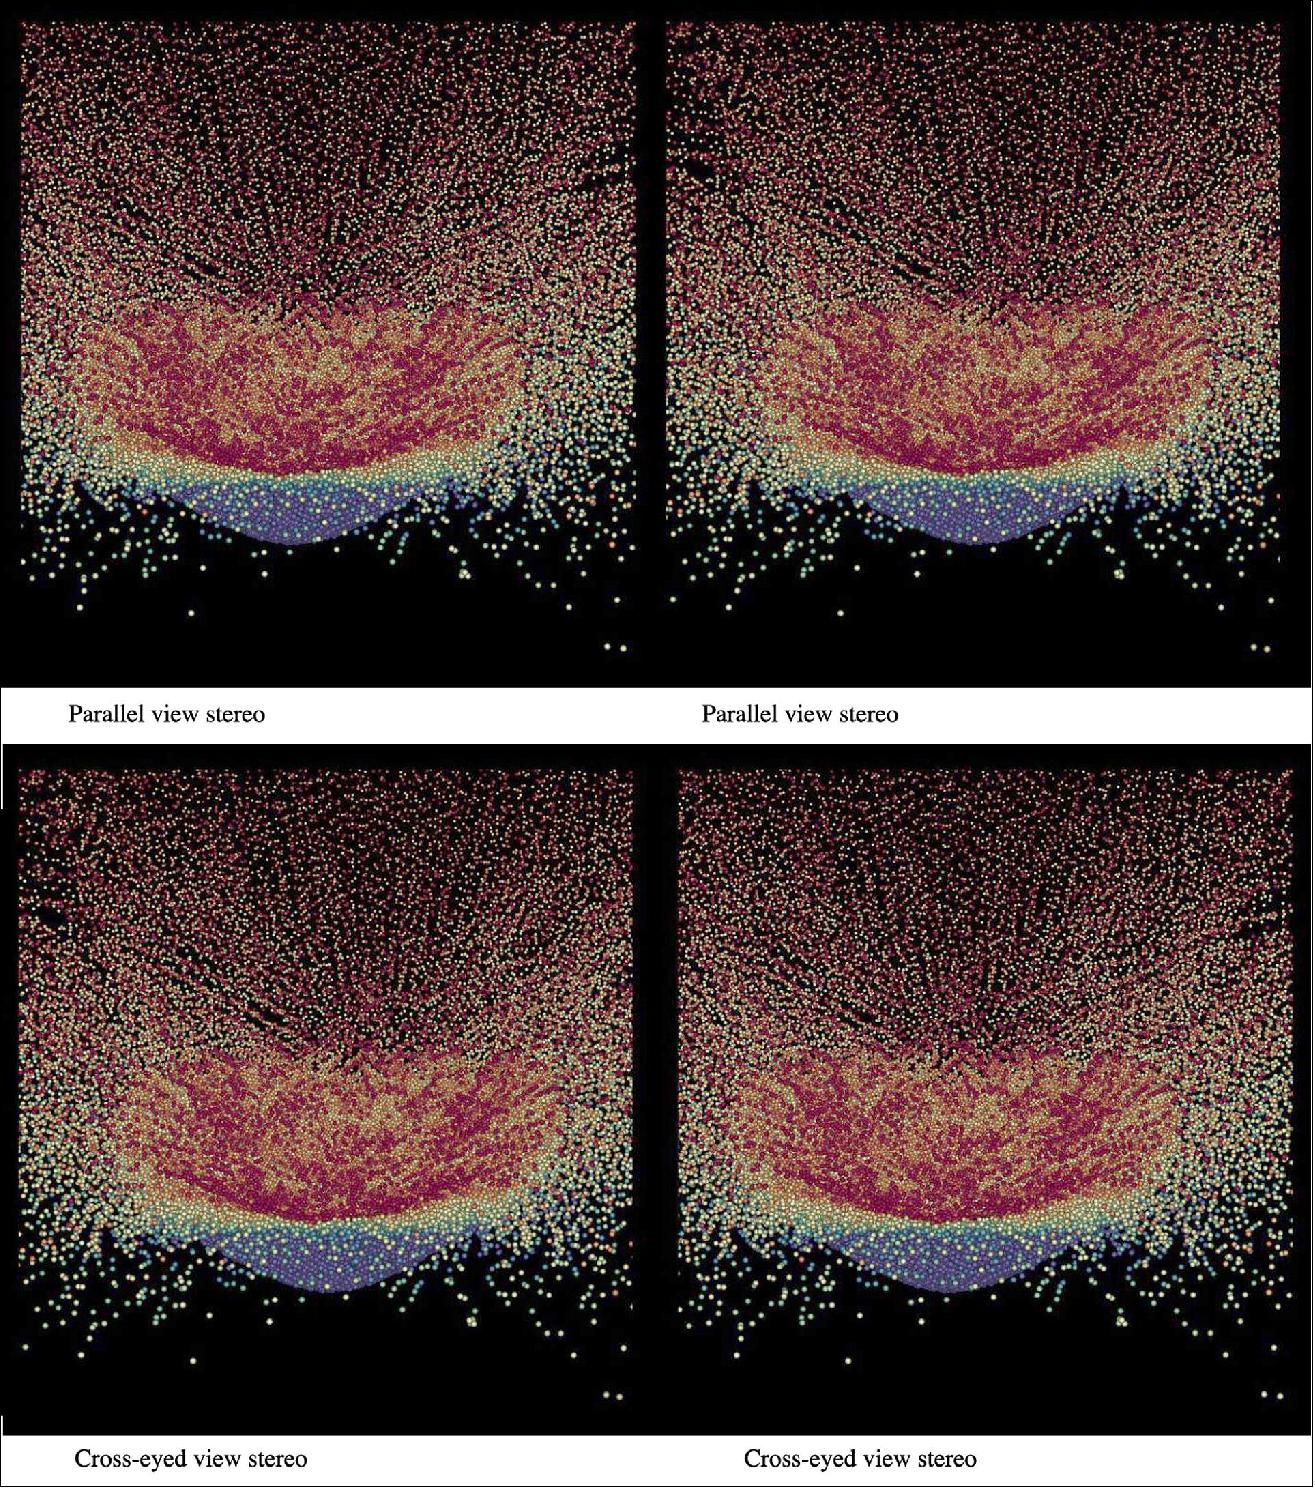 Figure 28: Stereogram images of simulated asteroid disruption. Stereo pairs made from numerical simulations of asteroid disruption, showing the first instance after the disruption before the fragments reaccumulate to form aggregates. Colors indicate the level of impact heating (from red to blue, from high to low), showing that some materials are more heated than others. To be visualized in 3D, two options are presented: « parallel view » and « cross-eyed view » (image credit: Brian May and Claudia Manzoni)